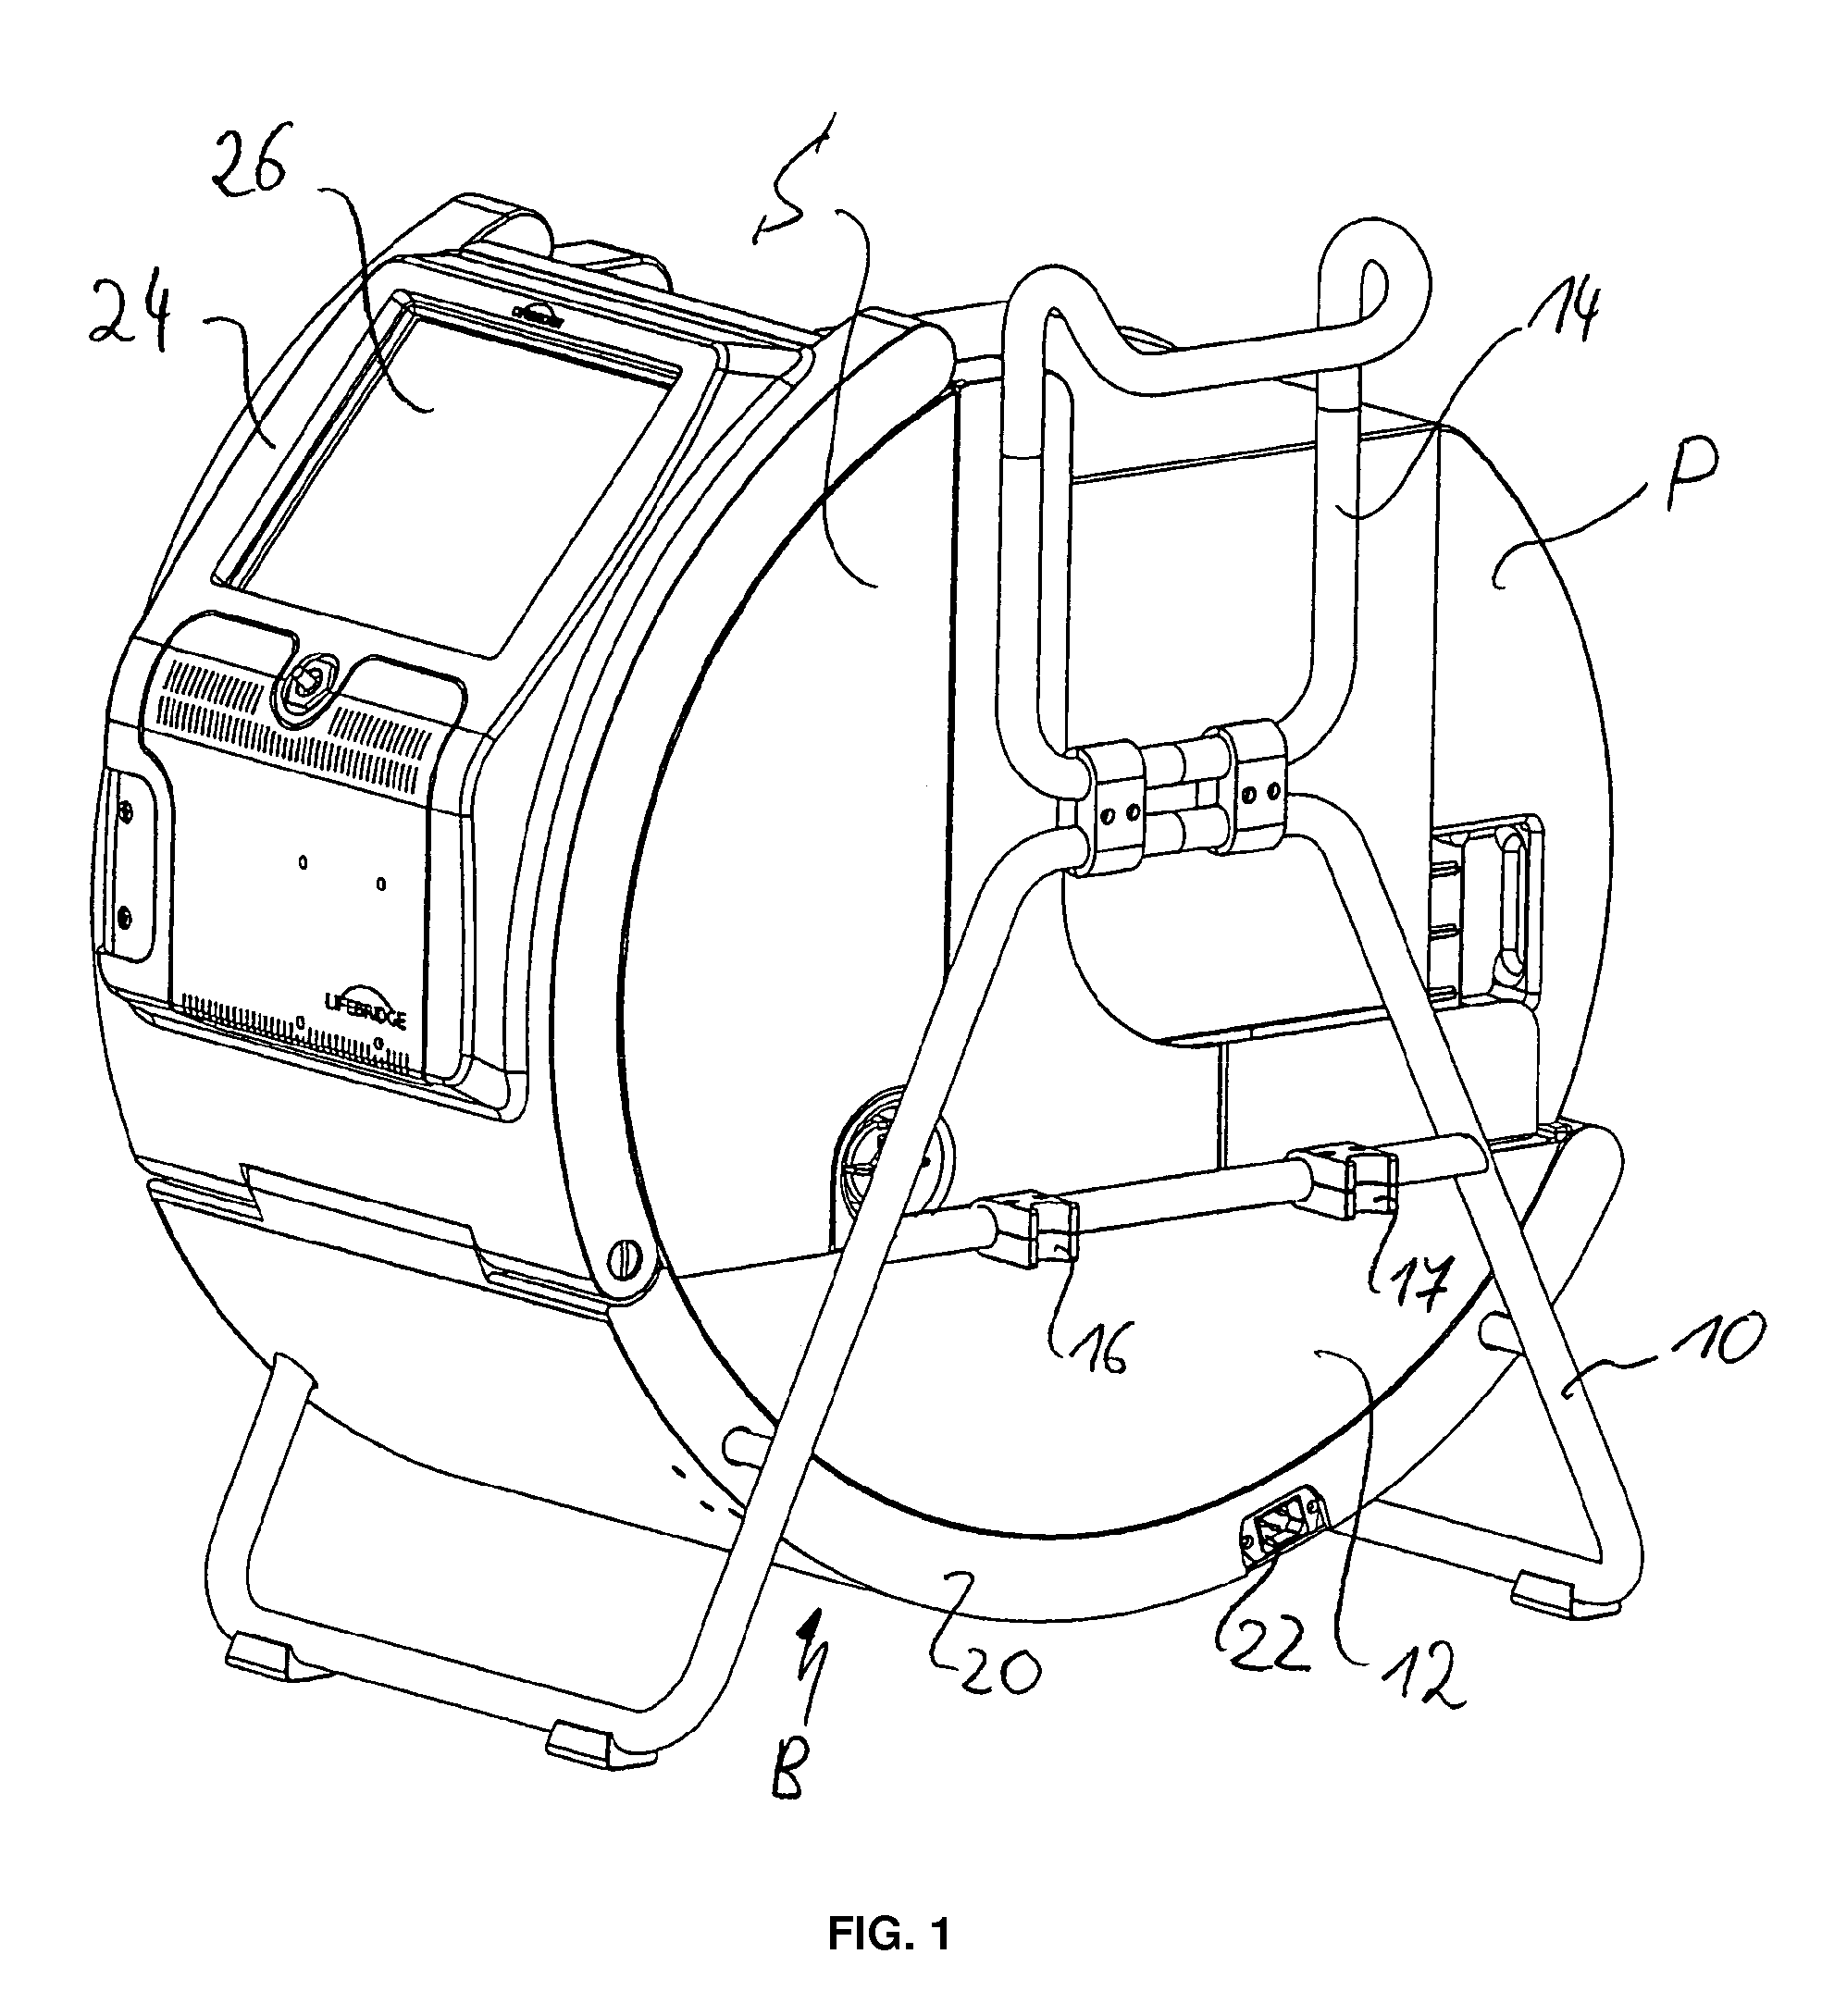 Cardiopulmonary apparatus and methods for preserving life